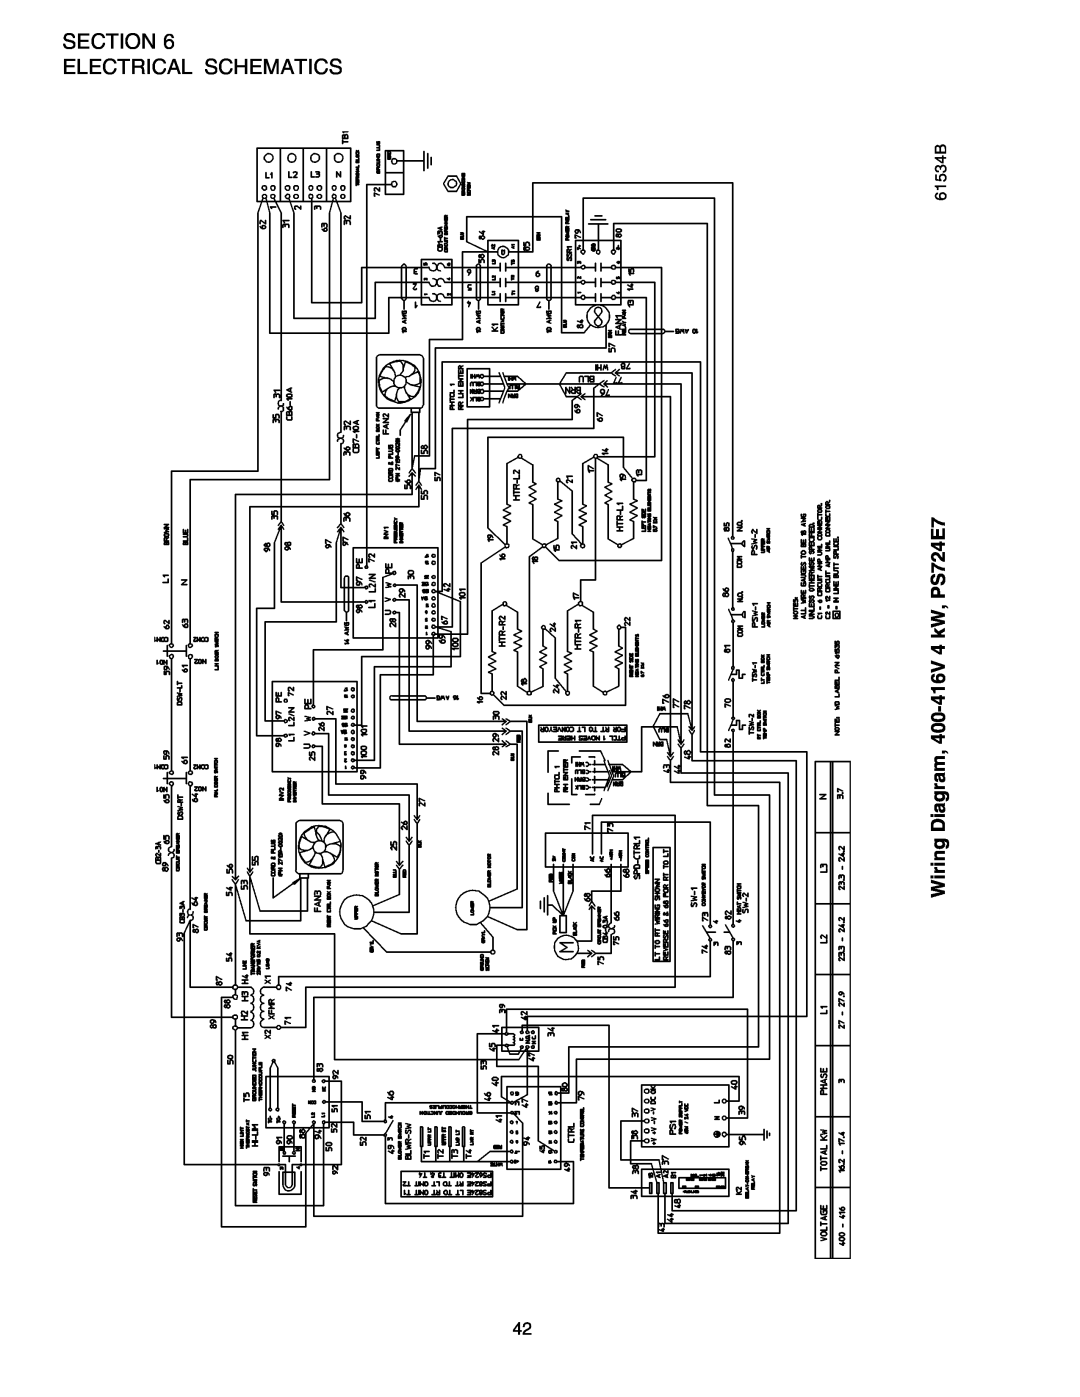 Middleby Marshall installation manual Section Electrical Schematics, Wiring Diagram, 400-416V 4 kW, PS724E7, 61534B 